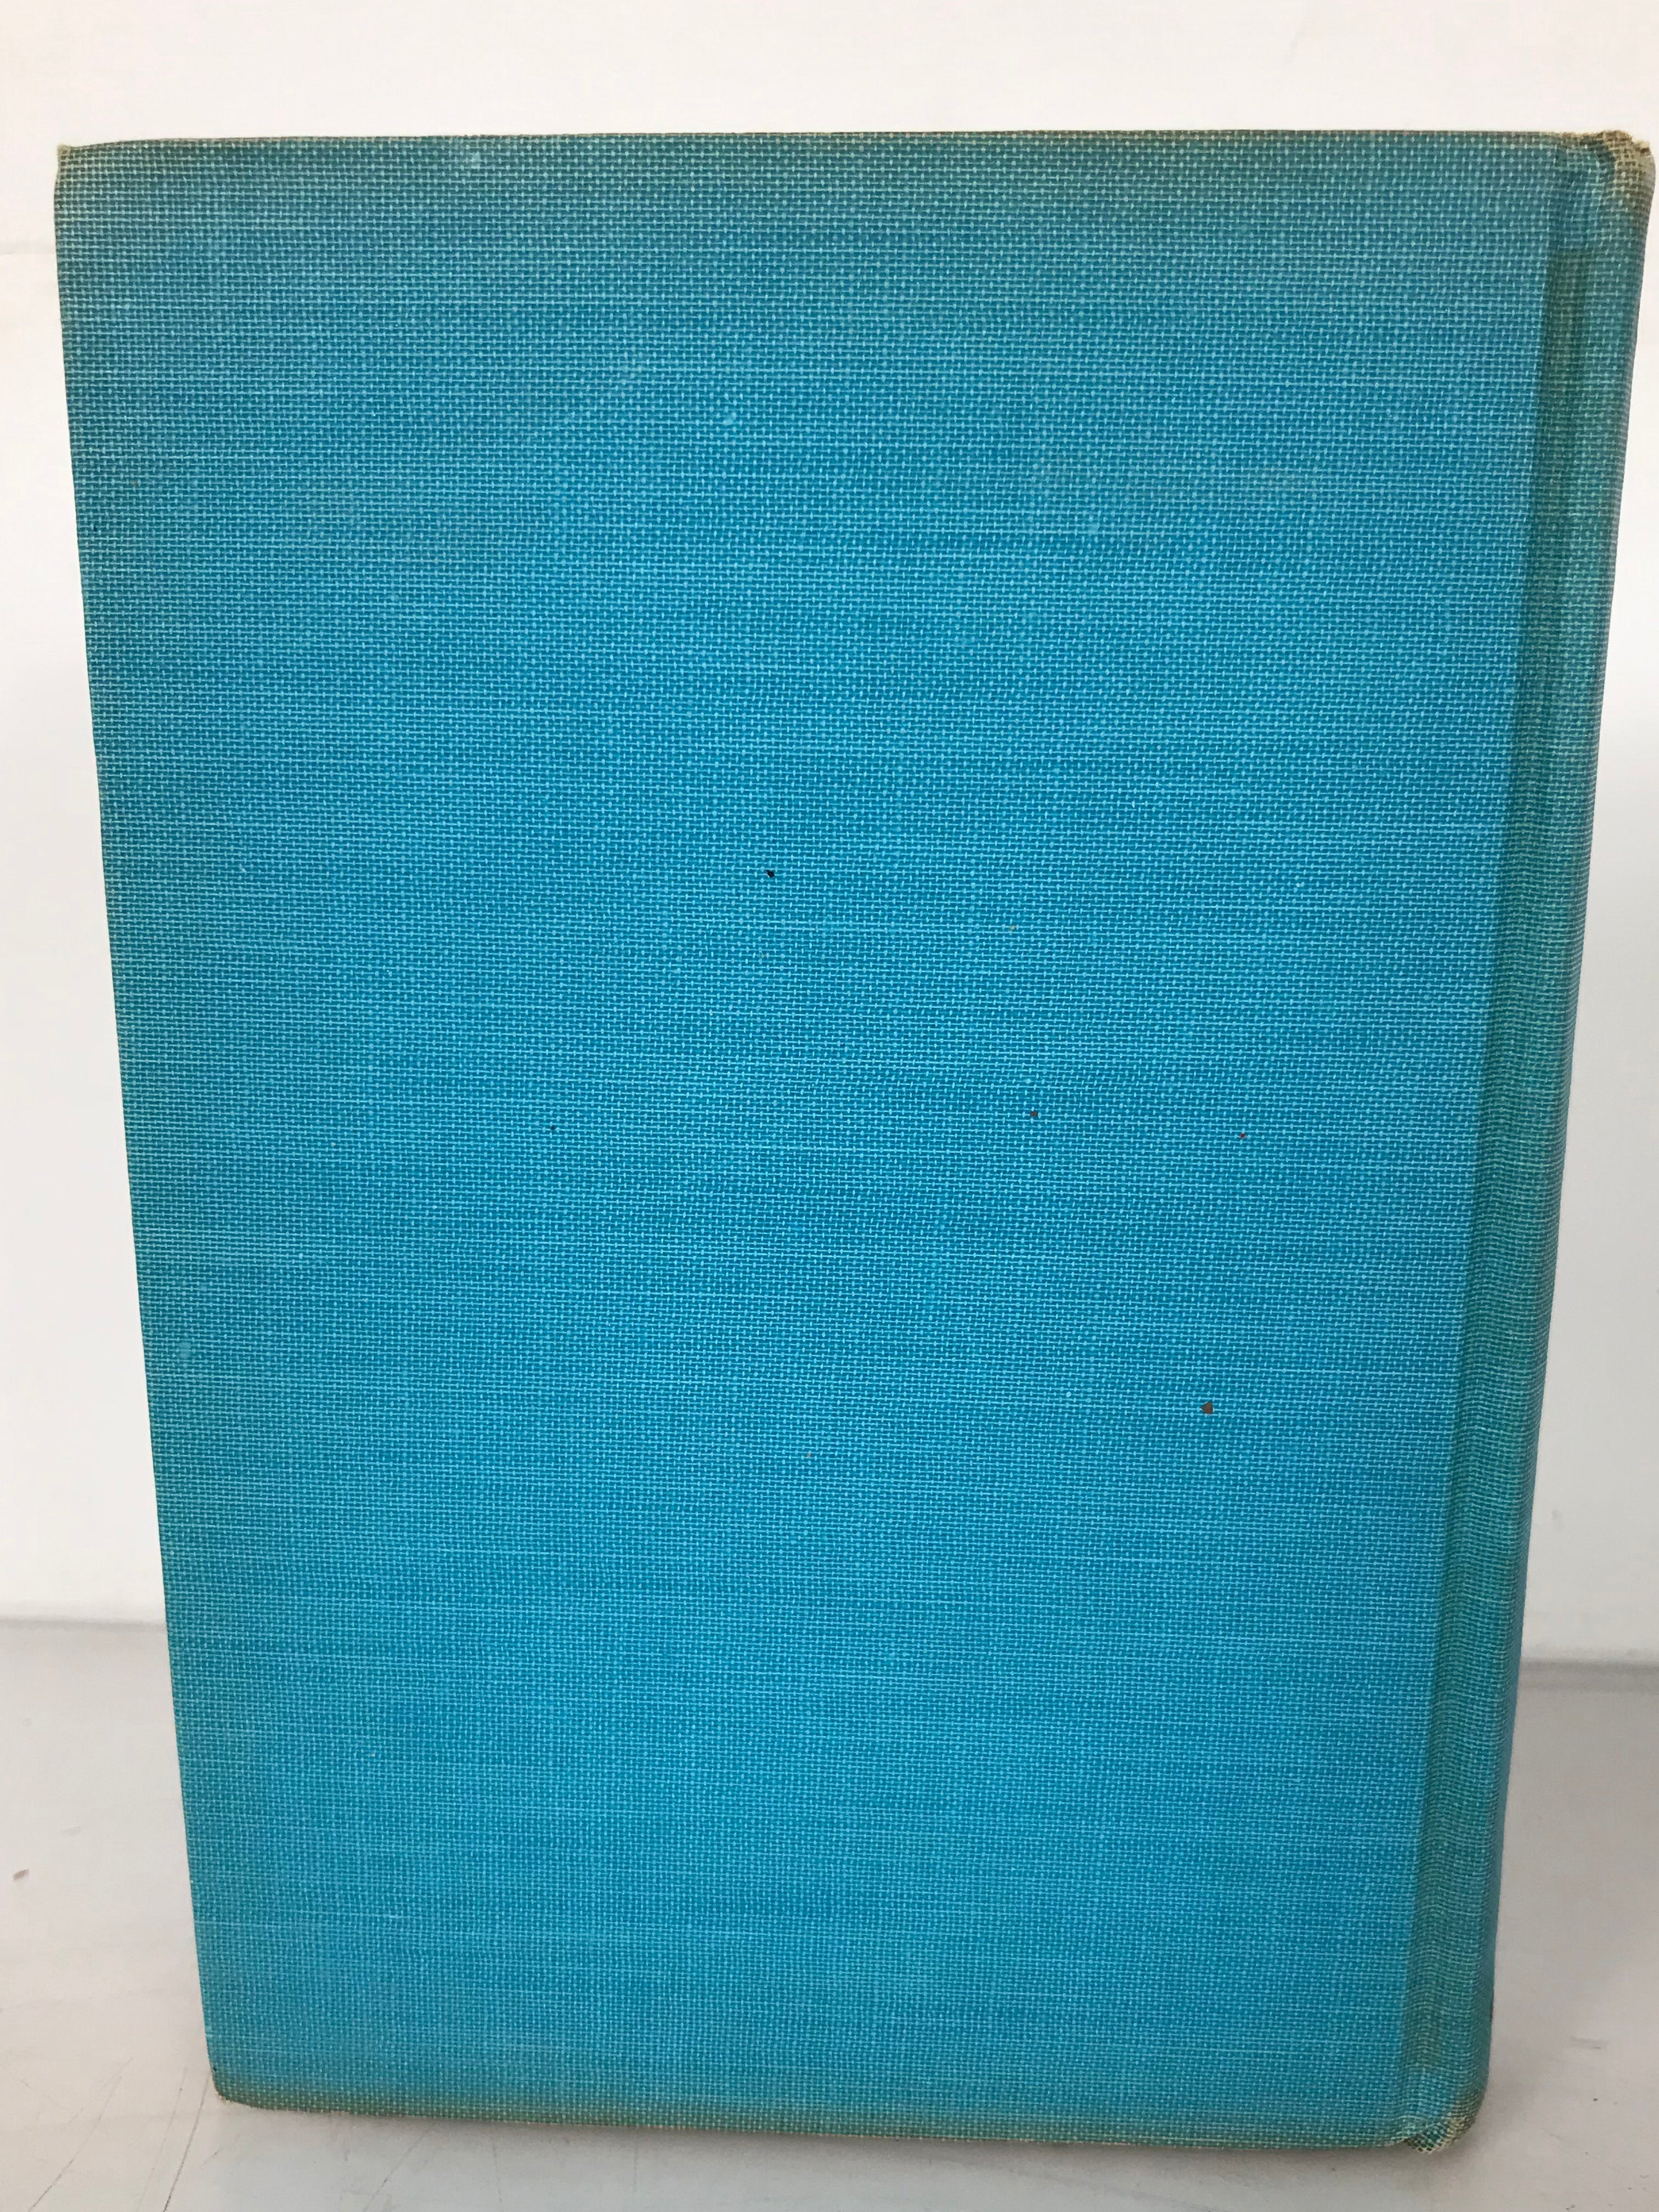 Wings Over the Rockies by Ambrose Newcomb 1930 Aviation HC